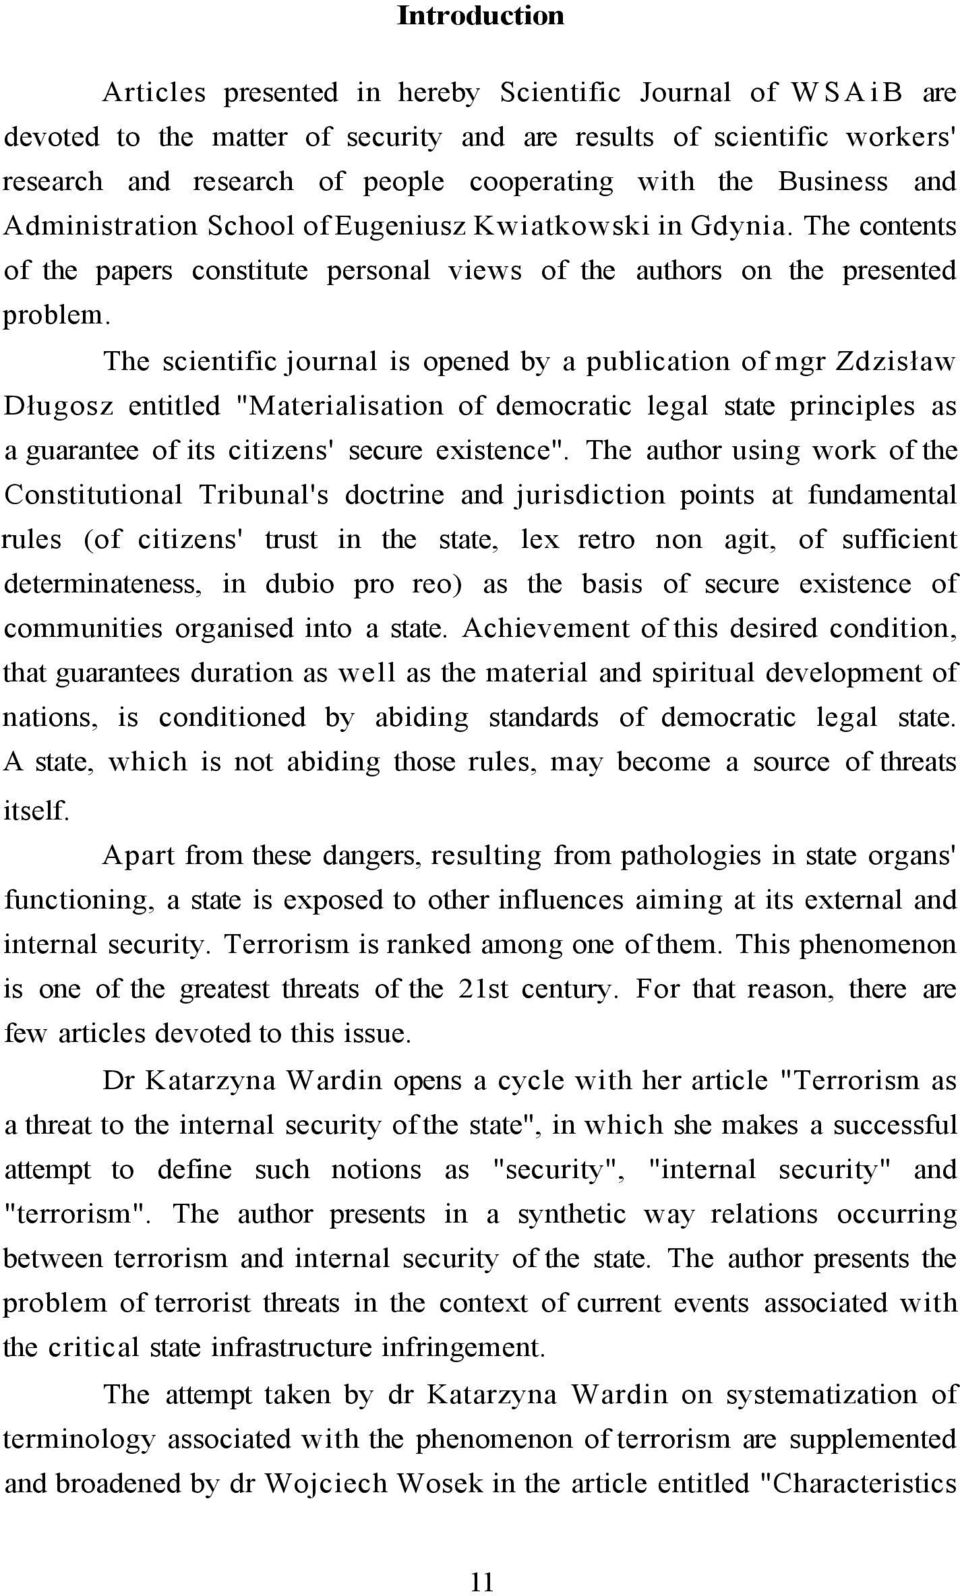 The scientific journal is opened by a publication of mgr Zdzisław Długosz entitled "Materialisation of democratic legal state principles as a guarantee of its citizens' secure existence".